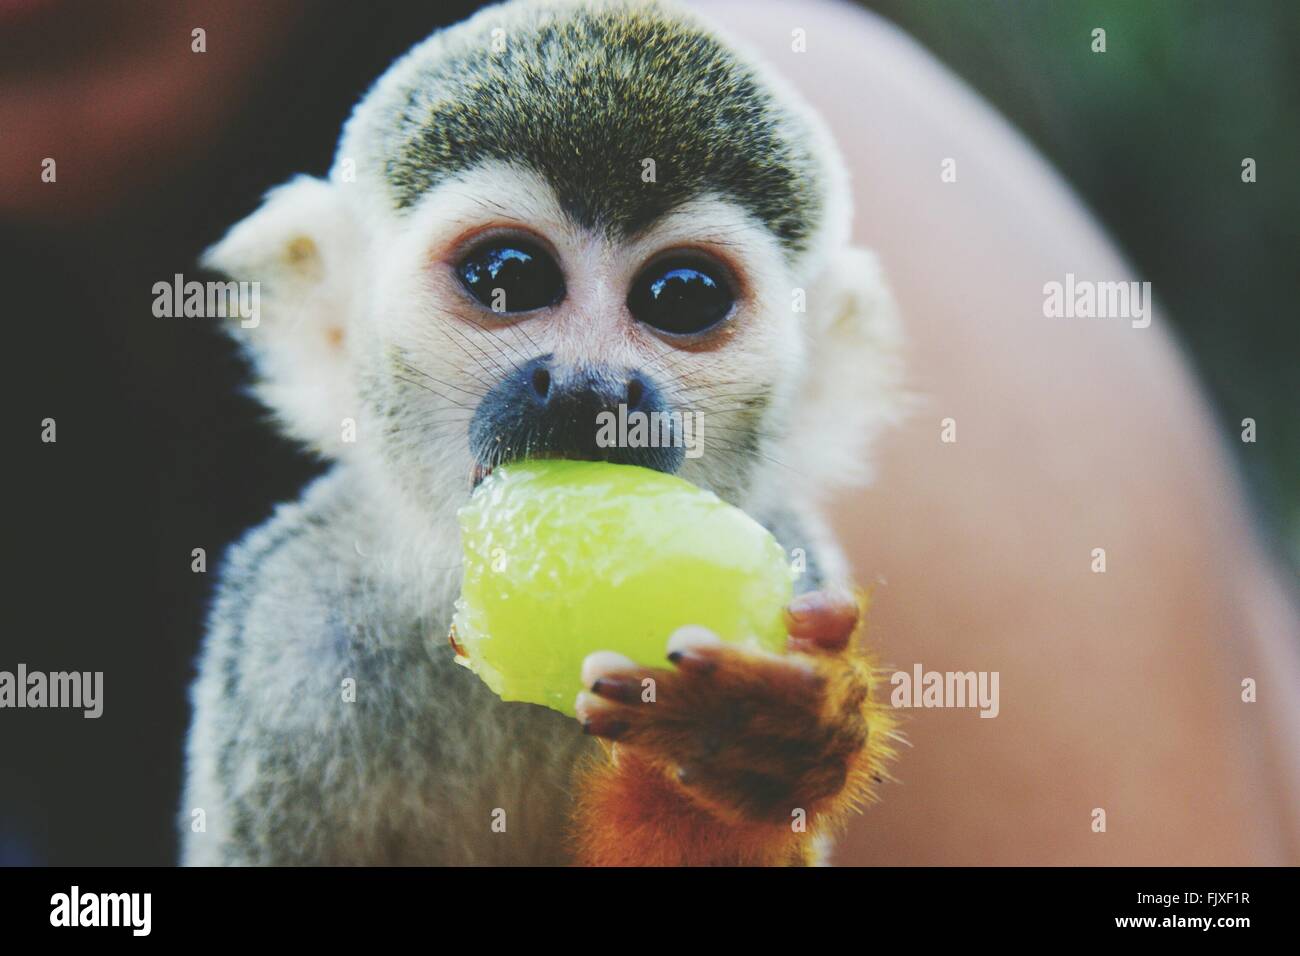 Portrait Of Squirrel Monkey Eating Fruit Outdoors Stock Photo